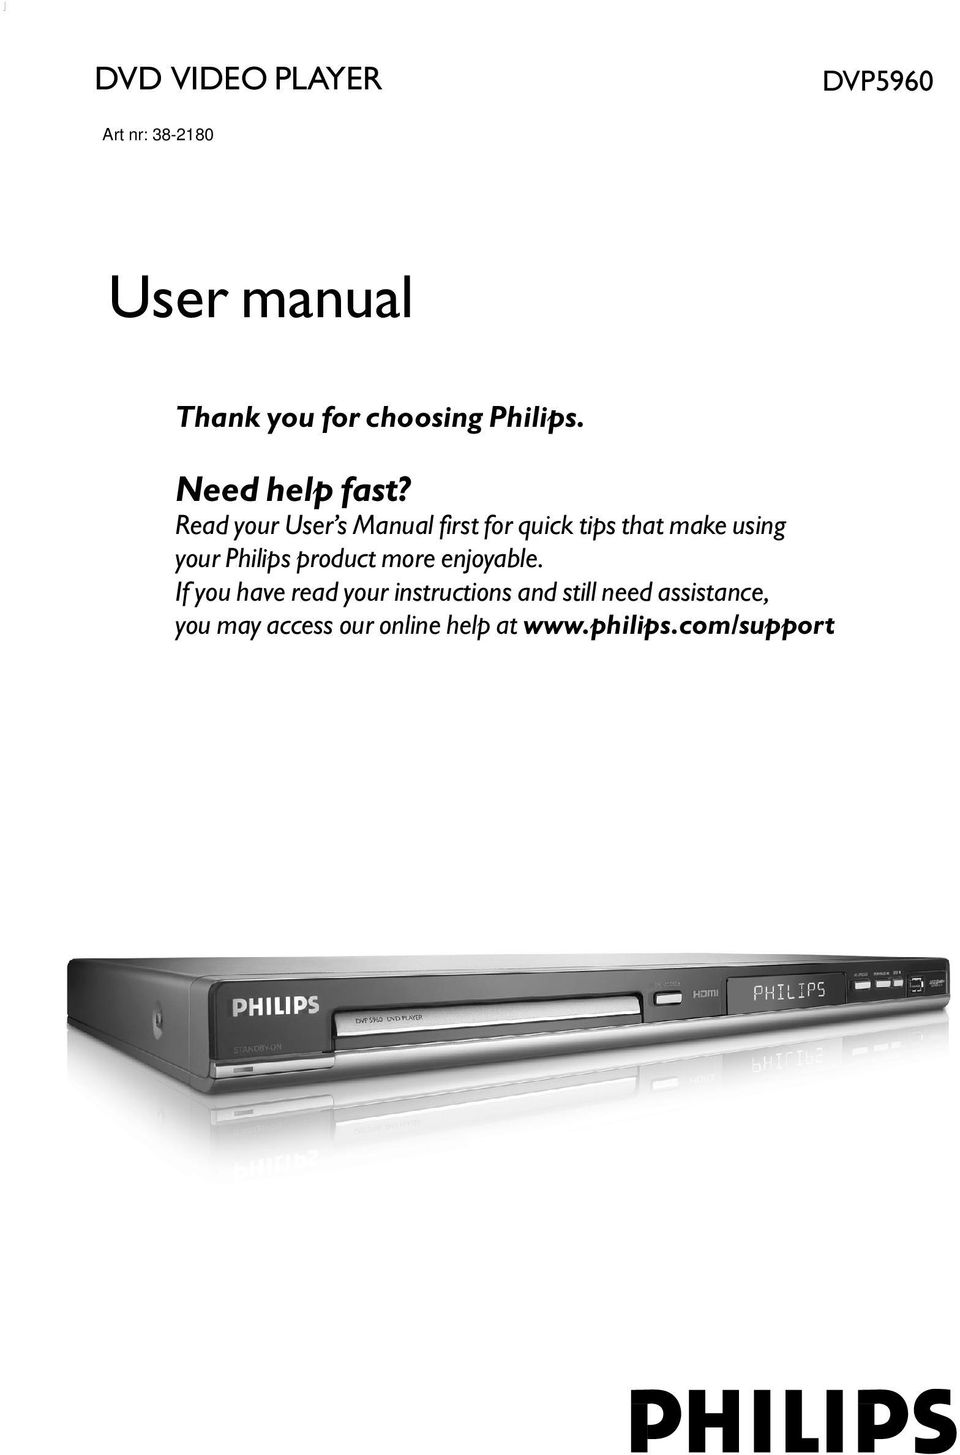 Read your User s Manual first for quick tips that make using your Philips